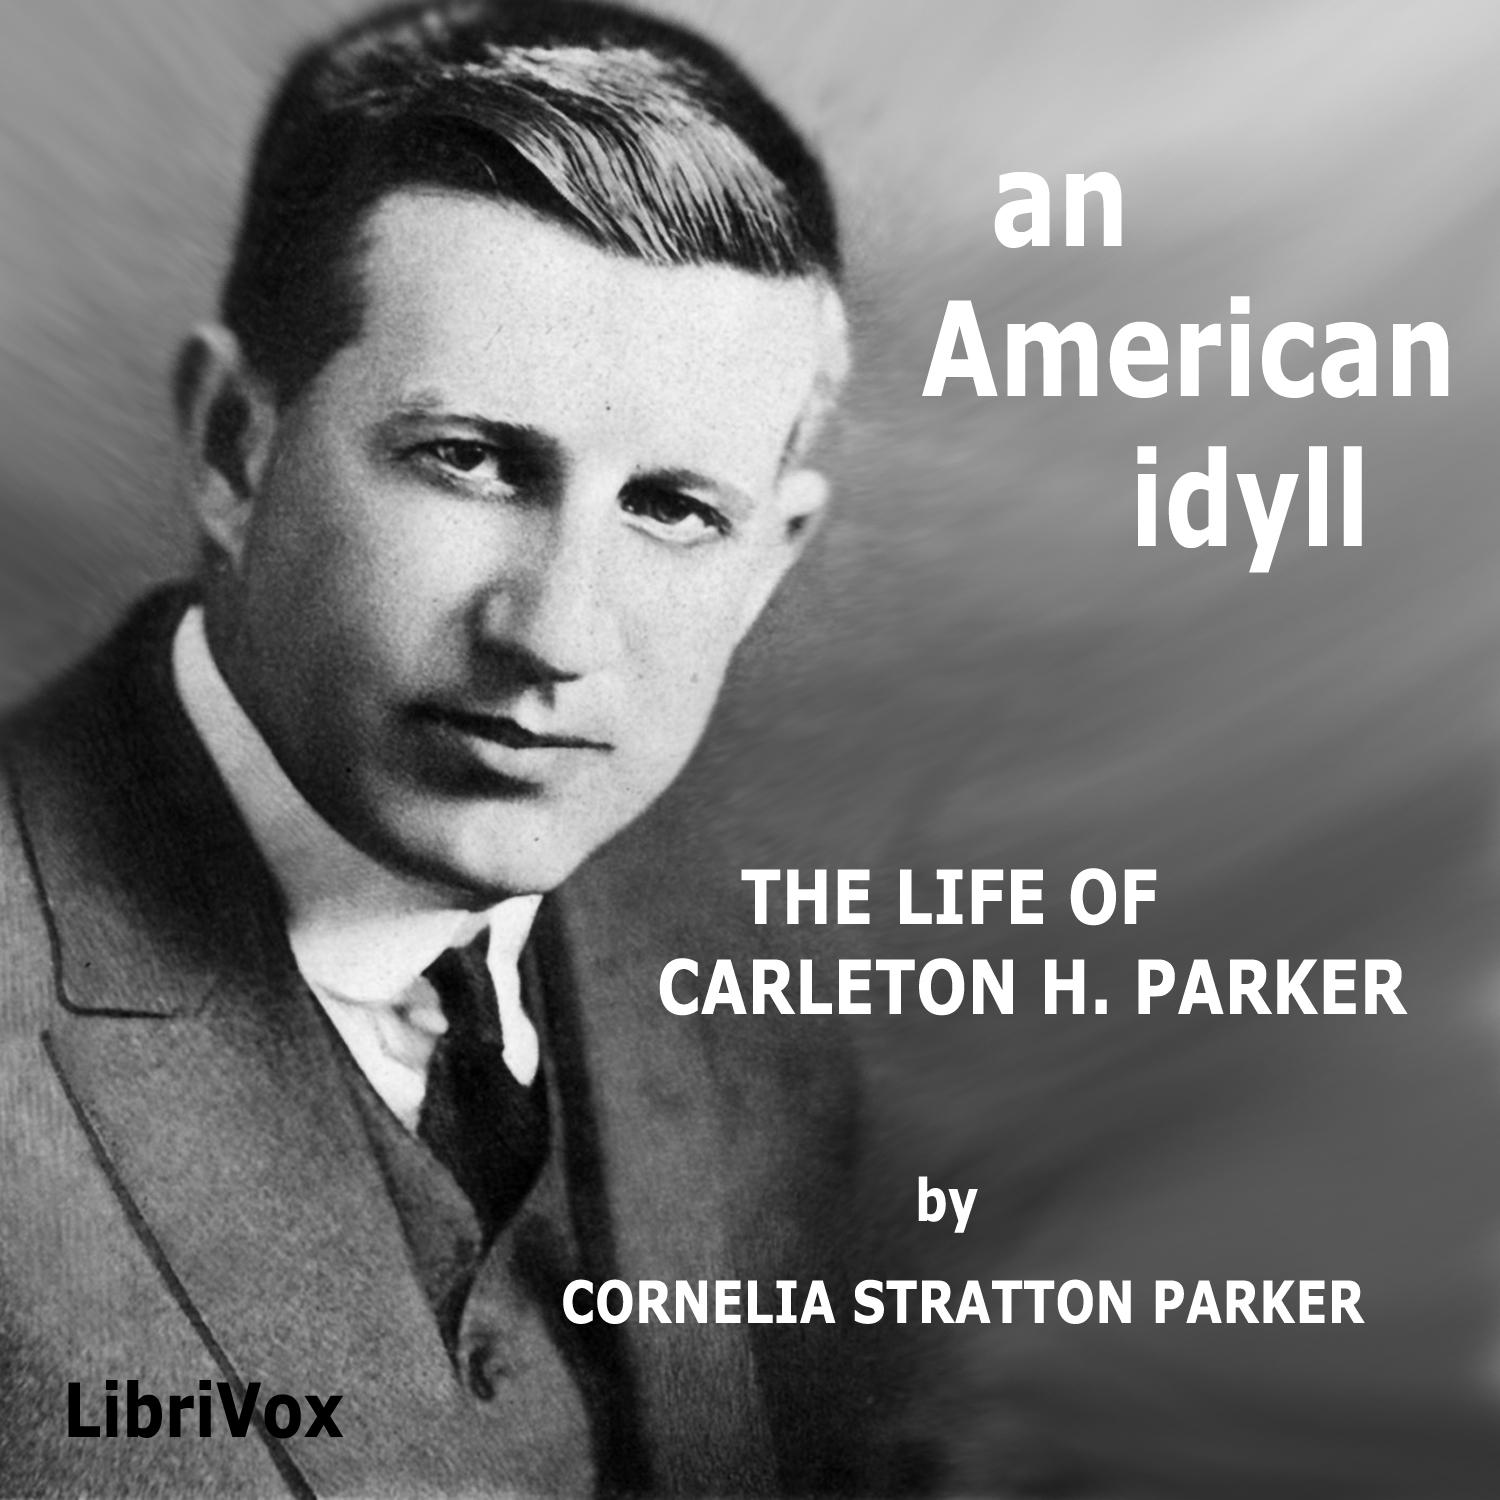 An American Idyll: The Life of Carlton H. Parker, #5 - Chapter IV